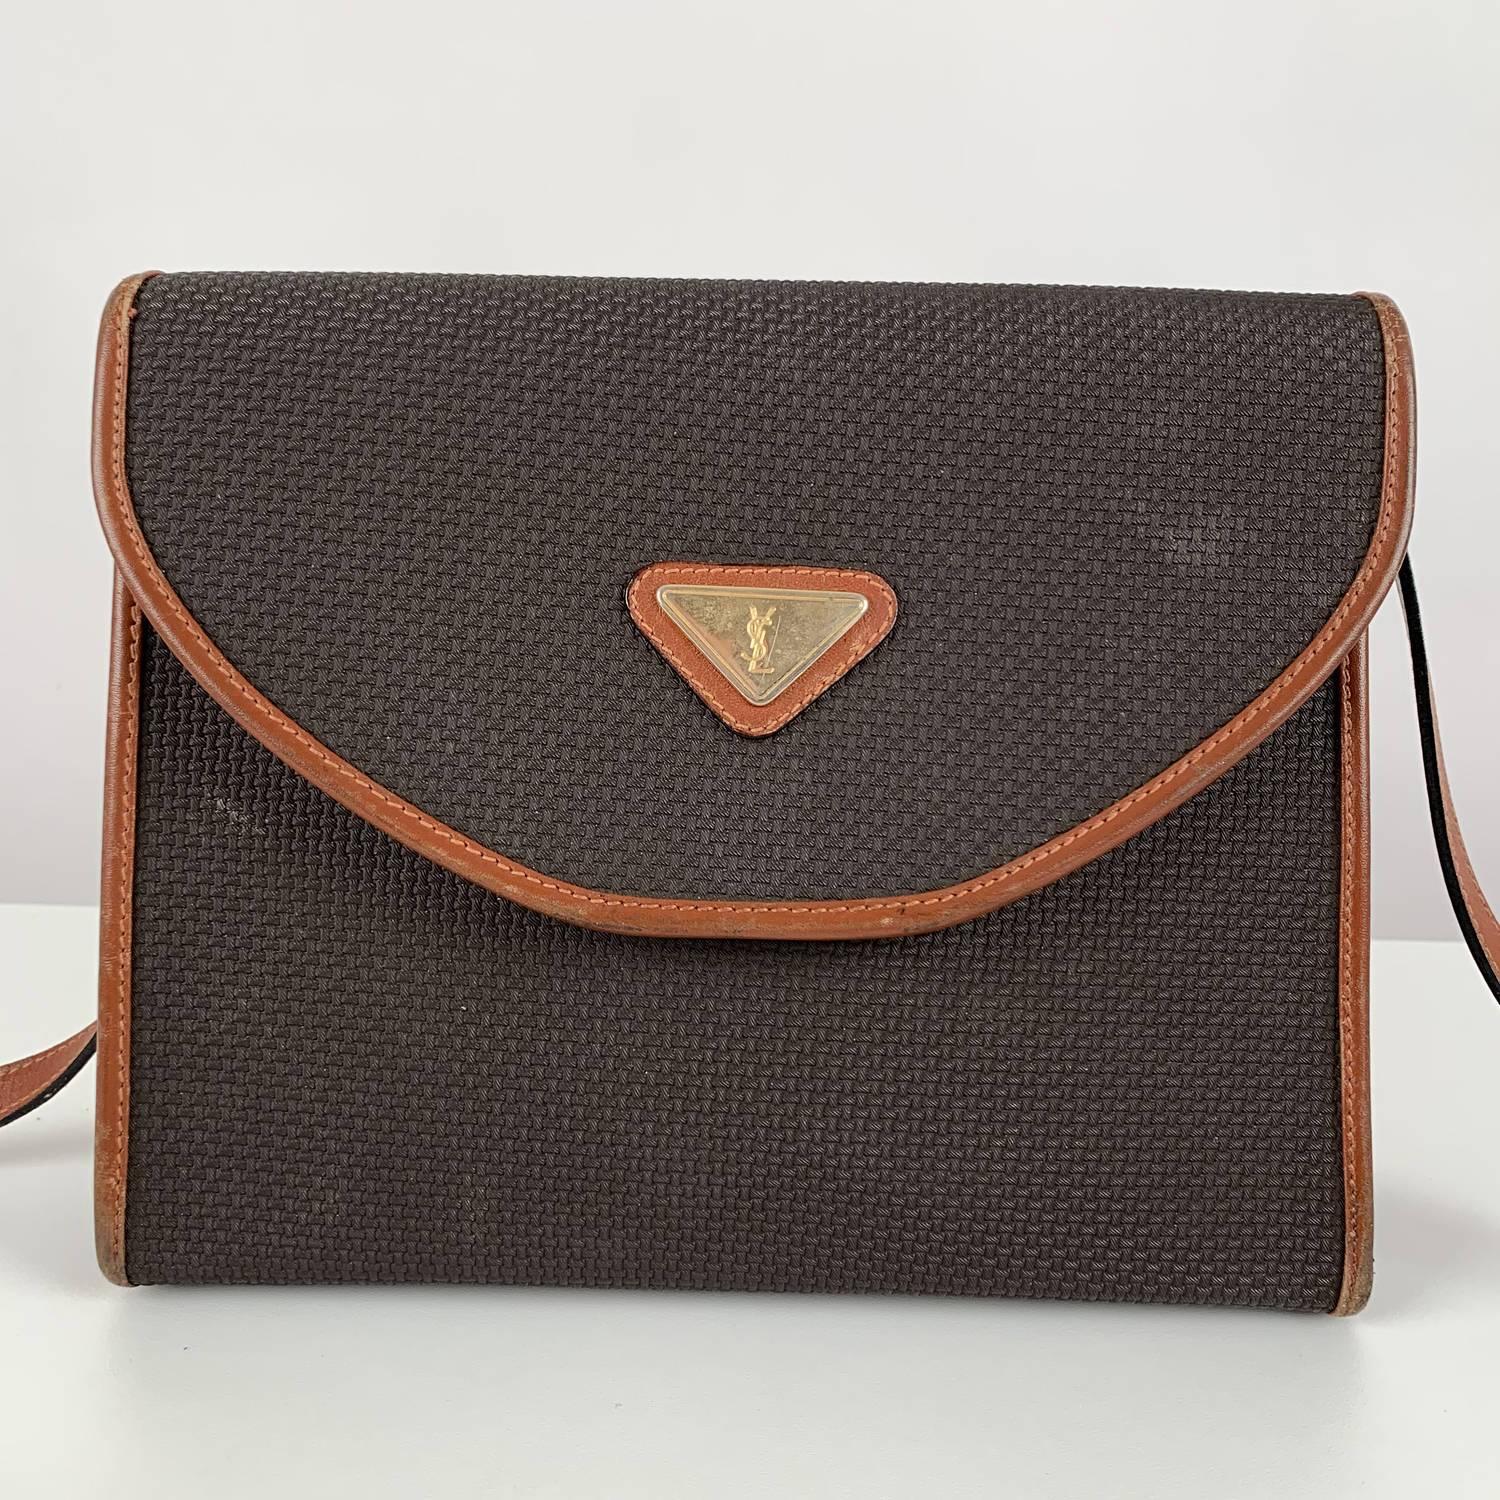 MATERIAL: Canvas COLOR: Tan MODEL: Crossbody Bag GENDER: Women SIZE: Small Condition CONDITION DETAILS: B :GOOD CONDITION - Some light wear of use - some darkness on leather trim due to normal use, some wear of use on bottom corners, some light